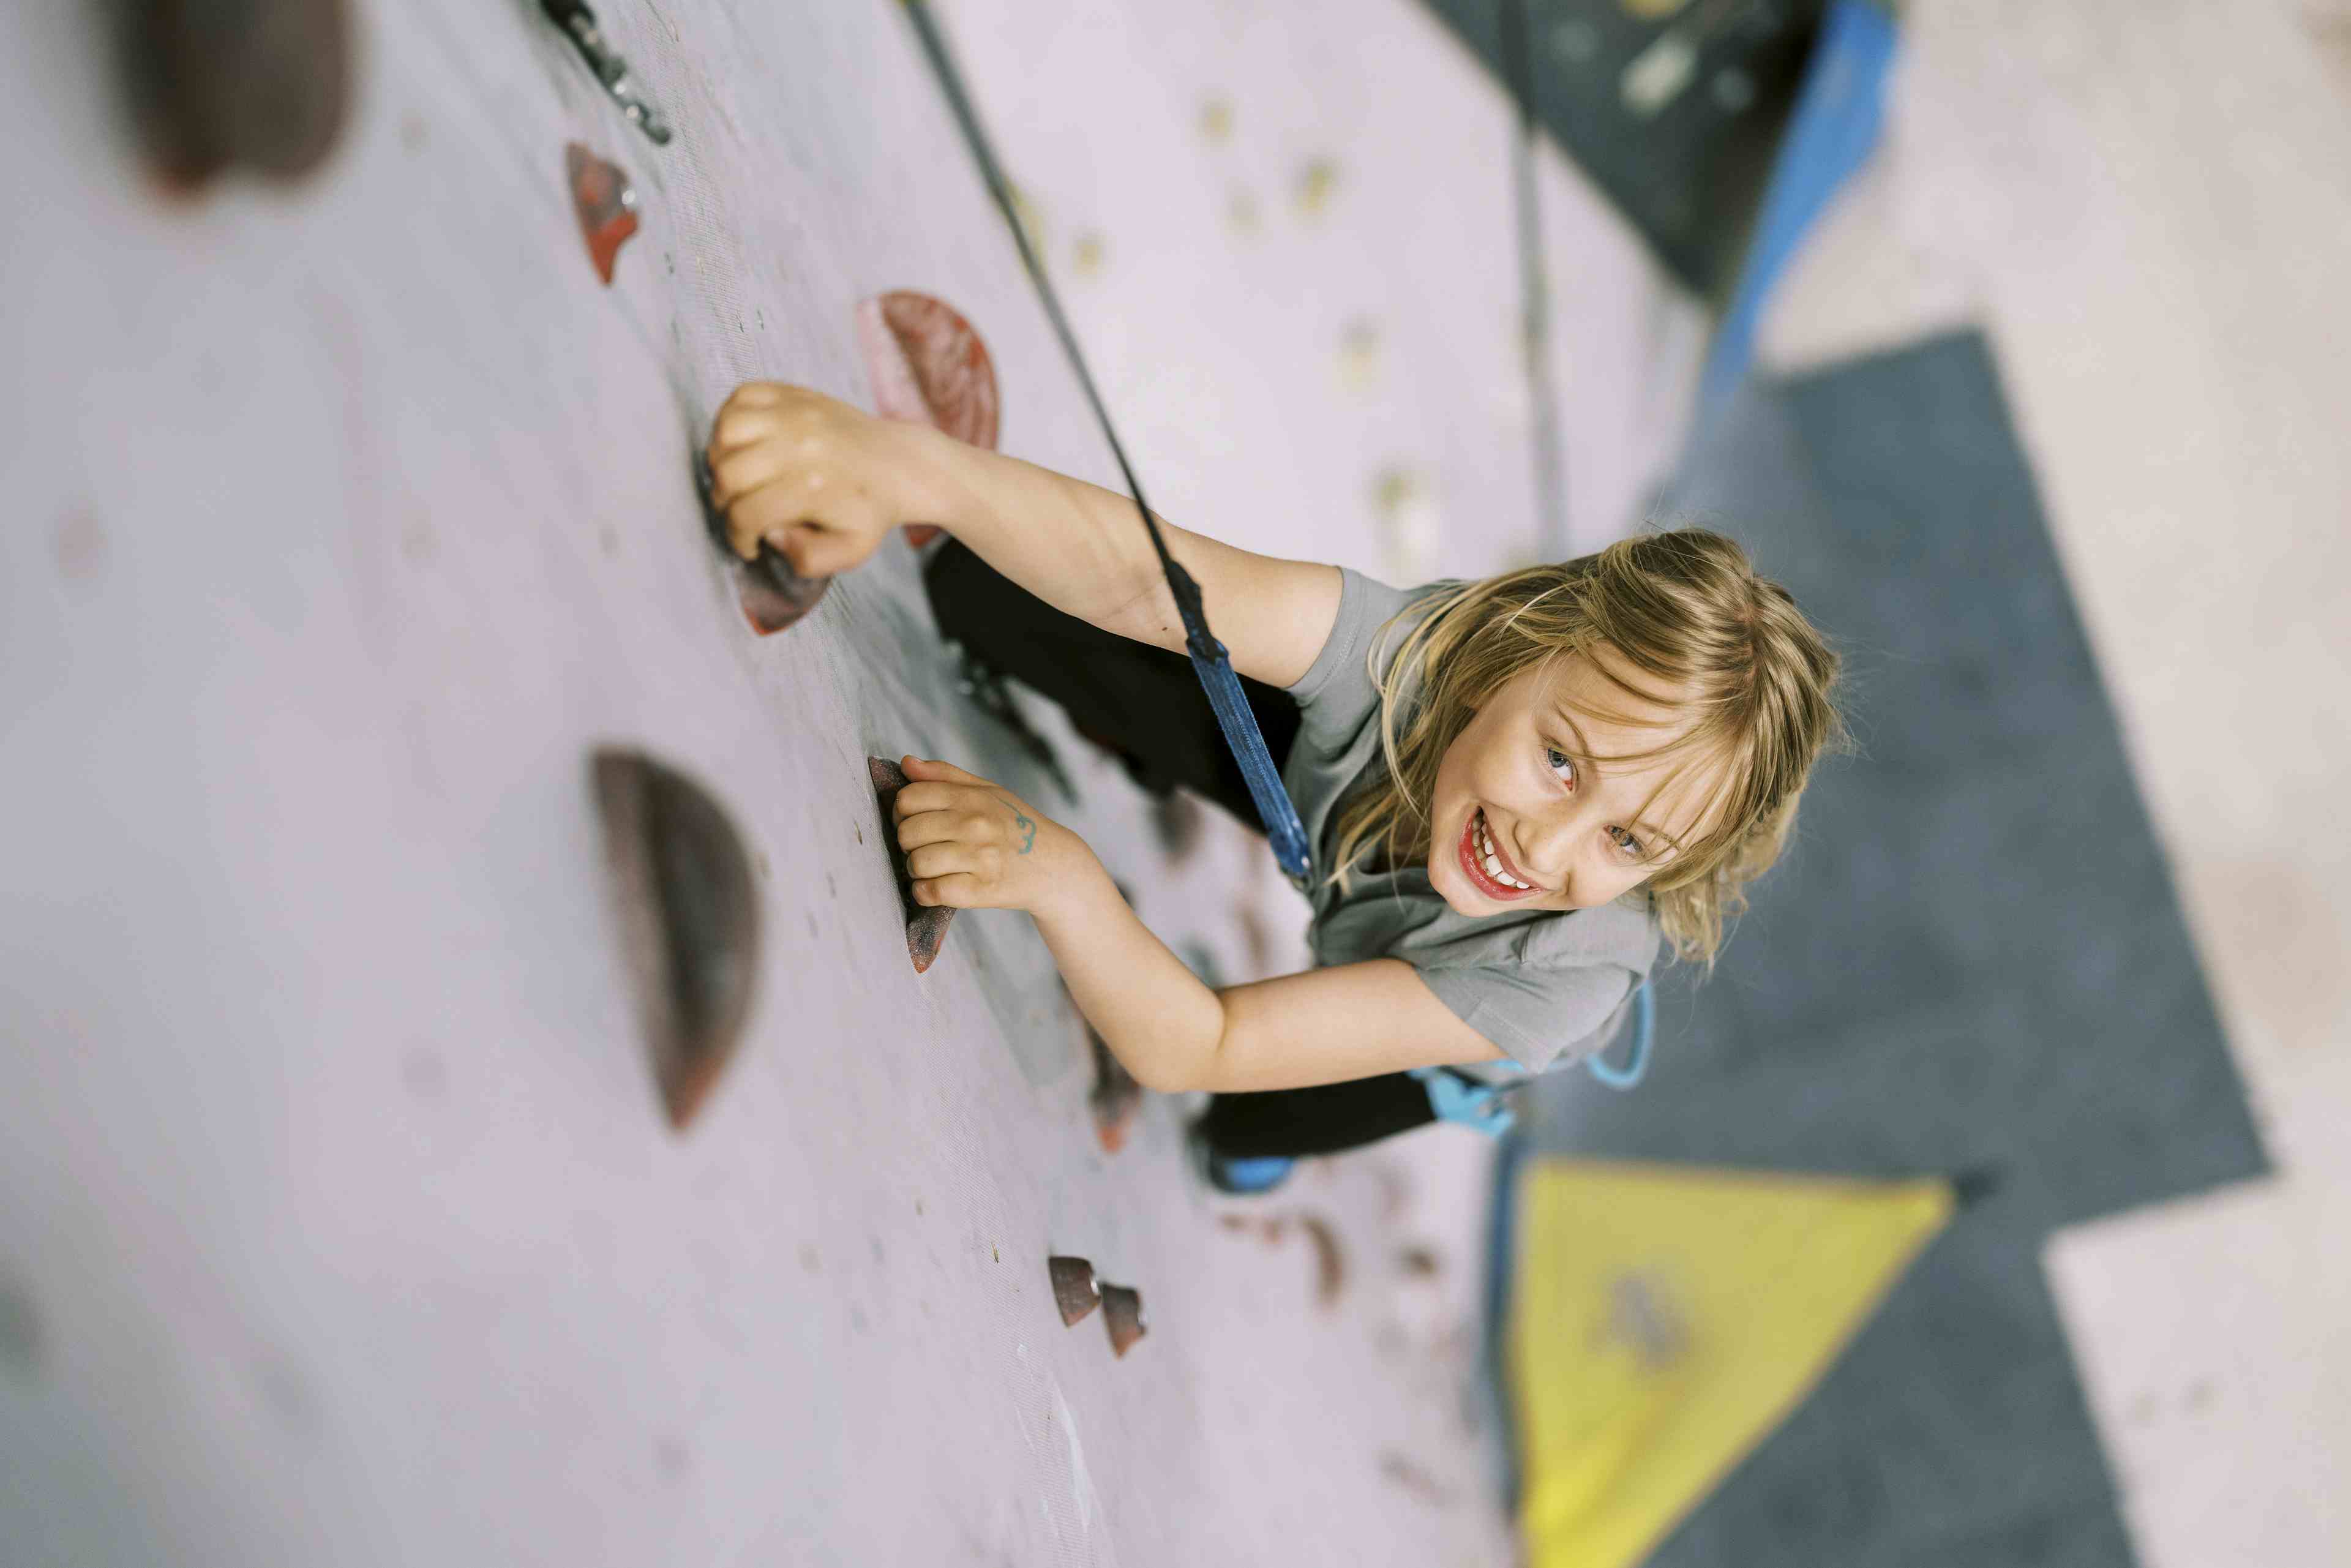 Small child climbing with harness in inside playpark Playground